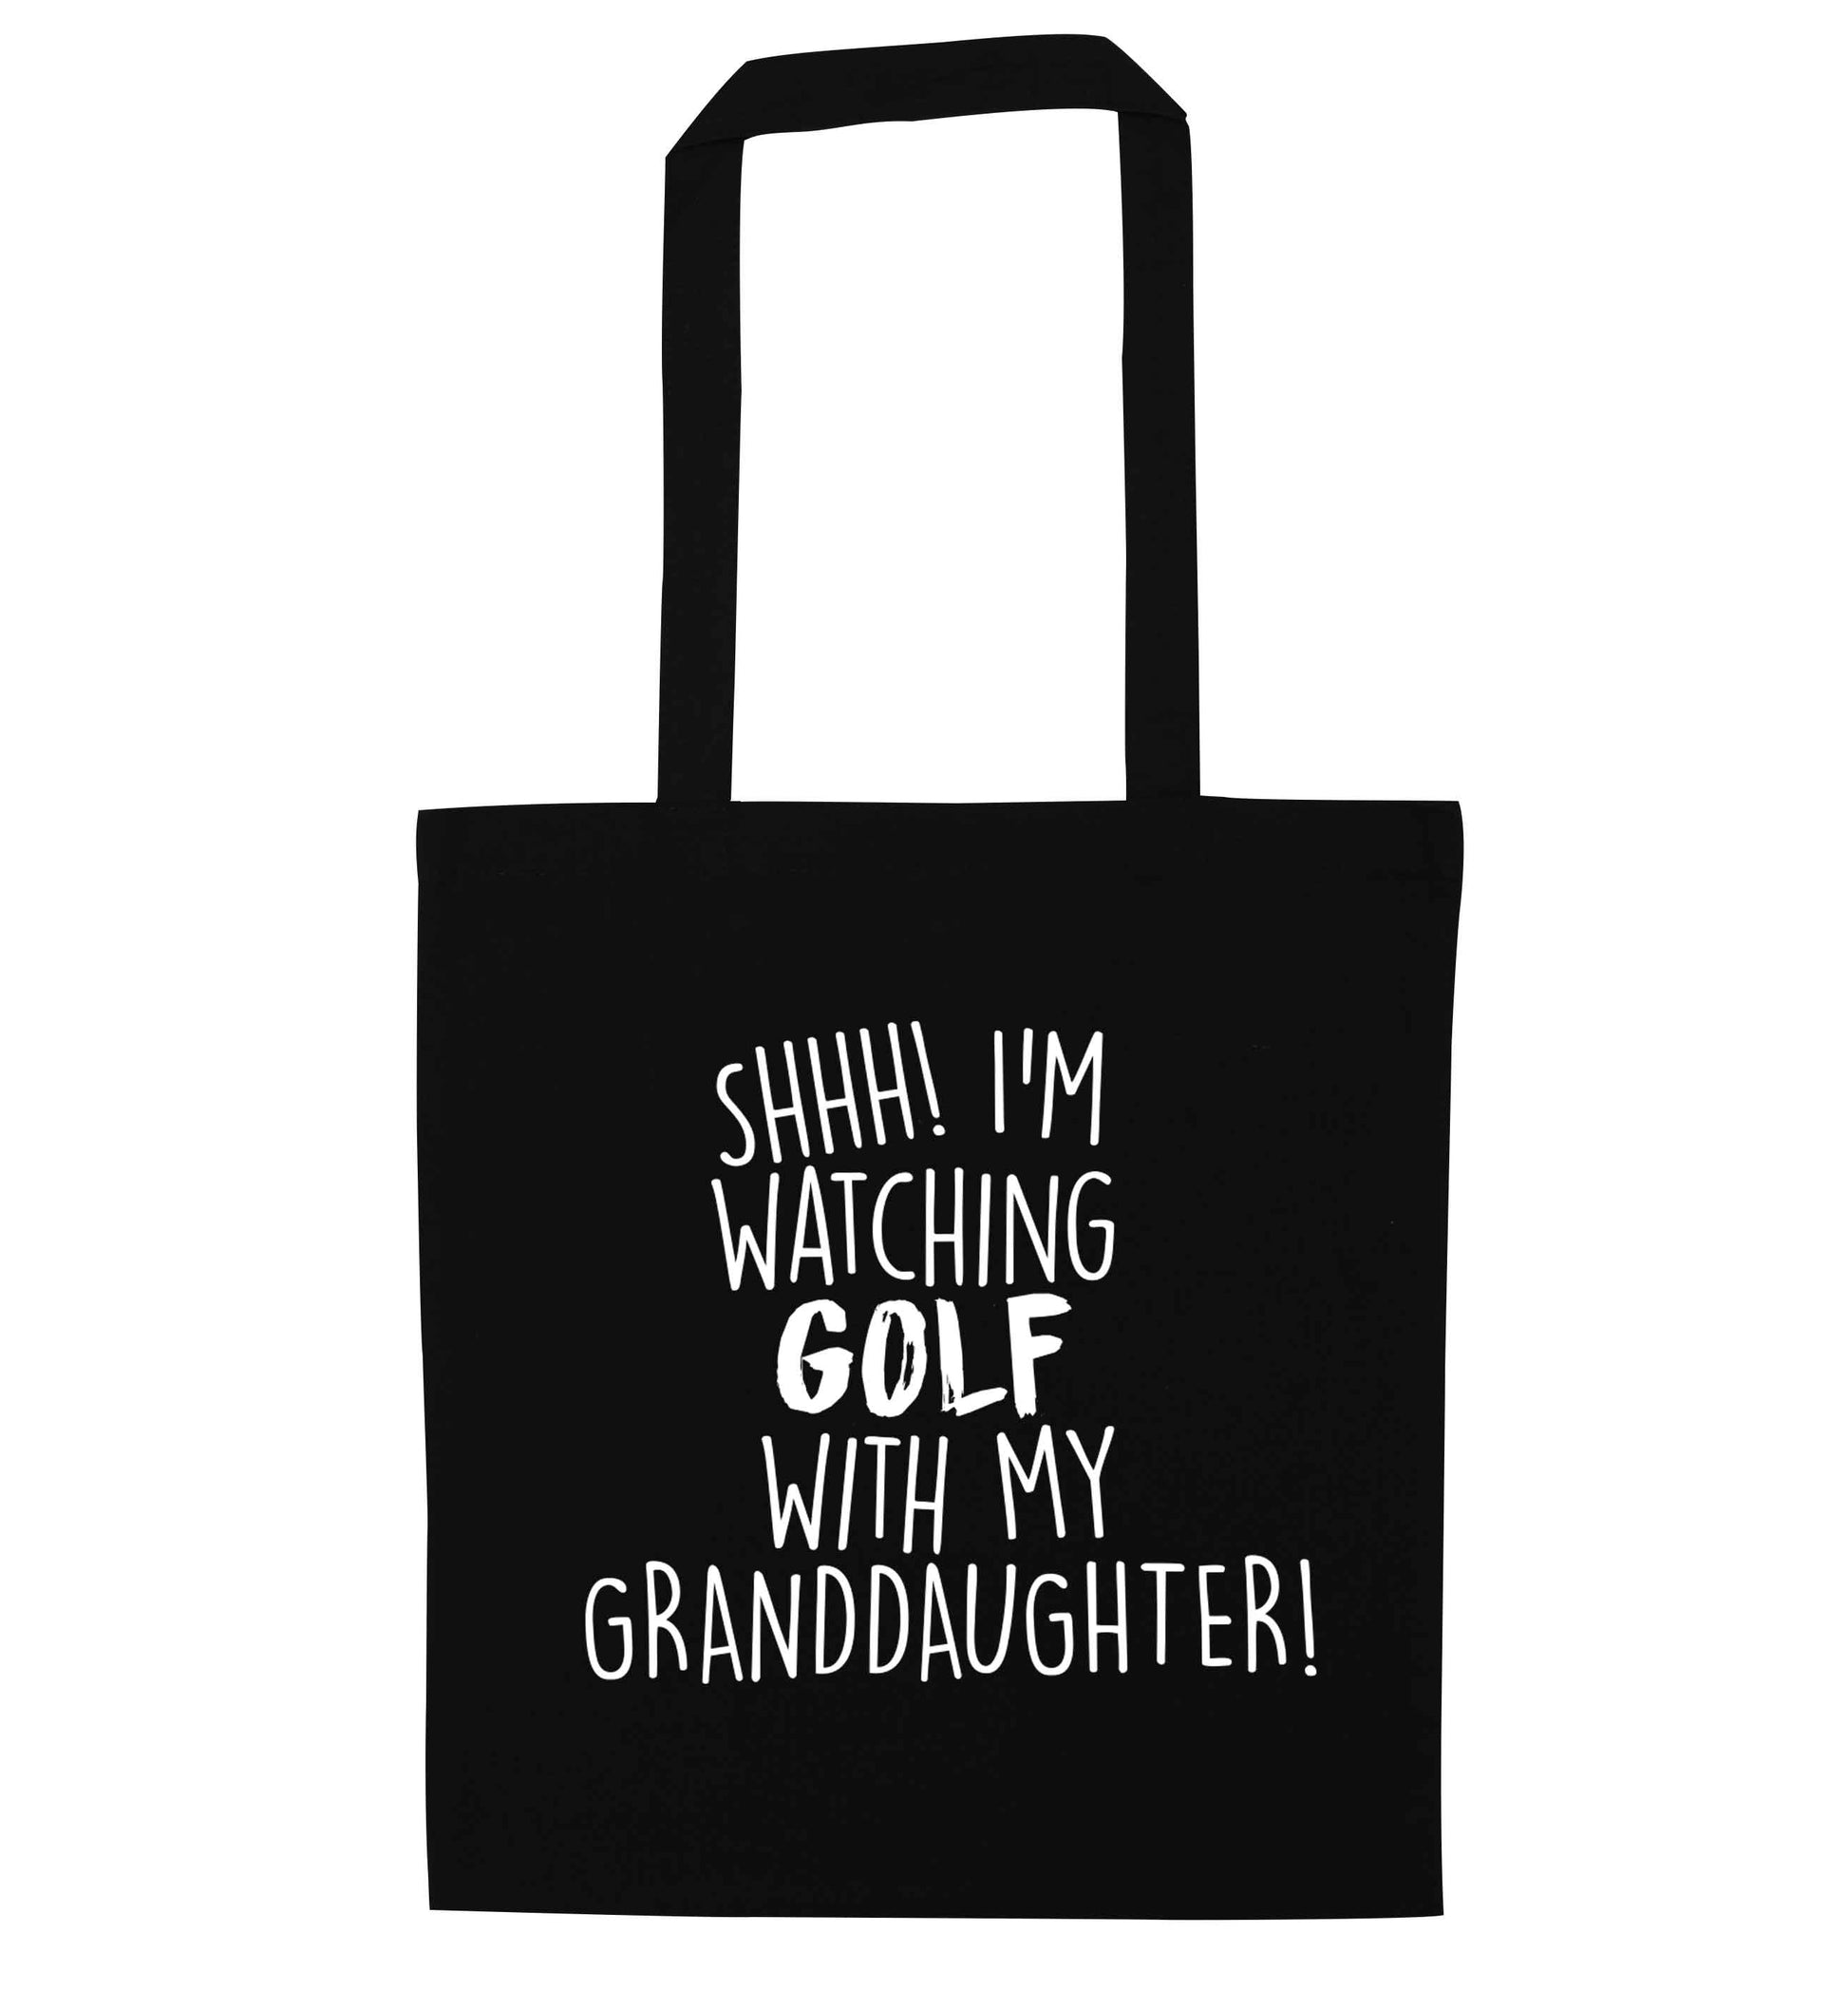 Shh I'm watching golf with my granddaughter black tote bag